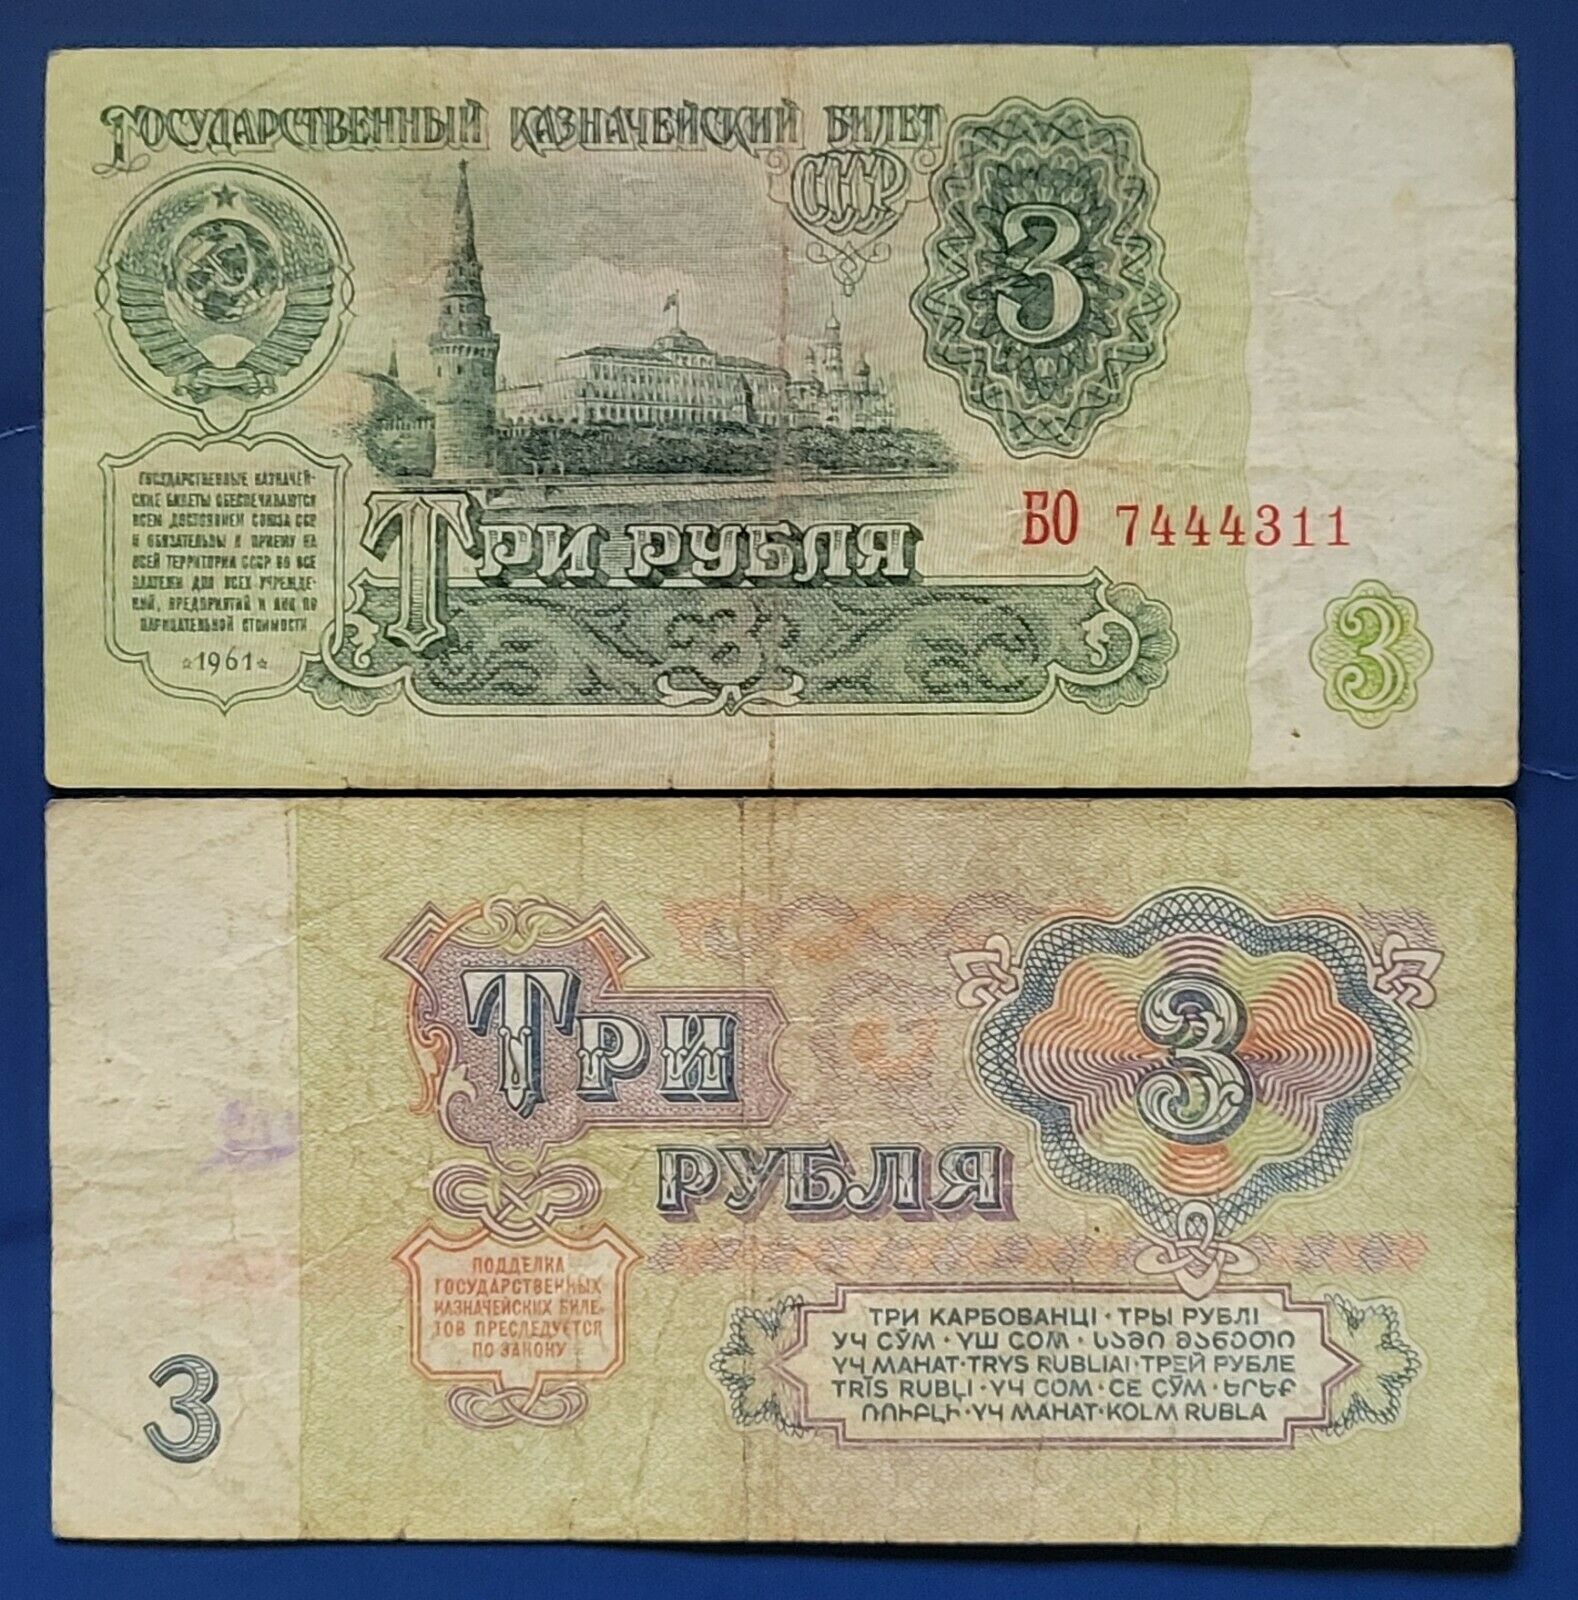 Primary image for RUSSIA 3 RUBLES 1961 BANKNOTE CIRCULATED CONDITION RARE NR